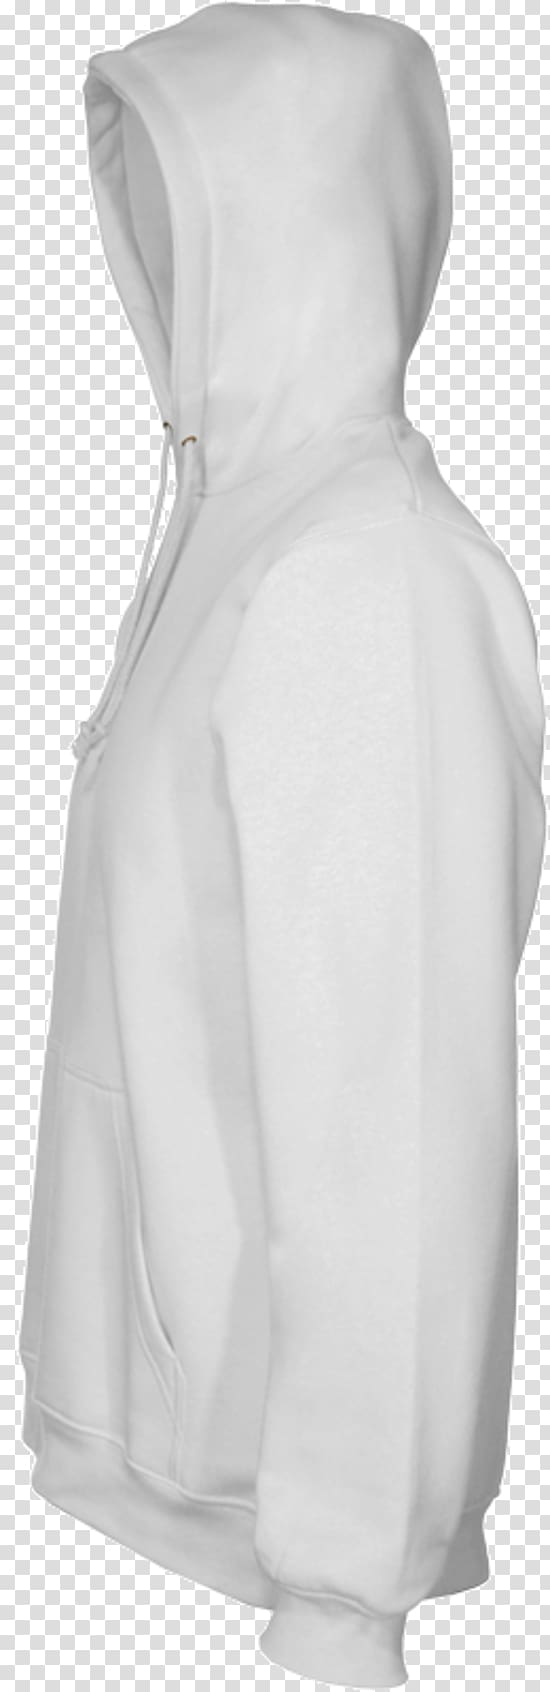 Hoodie Clothing Jumper Sweater, vests transparent background PNG clipart